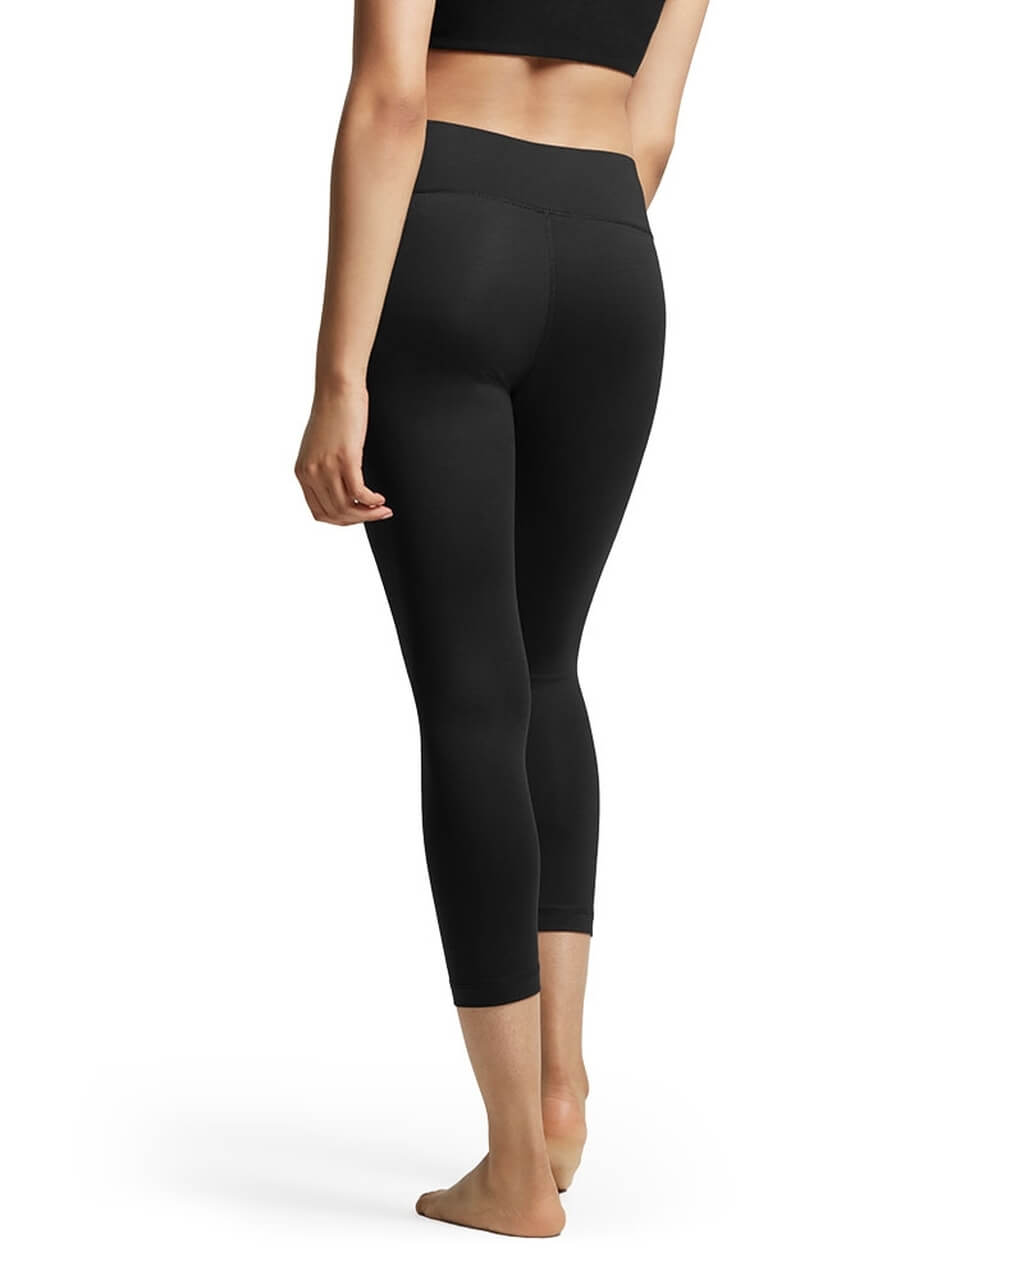 Tommie Copper Women's Performance Compression Capris I Breathable, UPF 50,  Zipper Pocket, Base Layer for All-Day Support